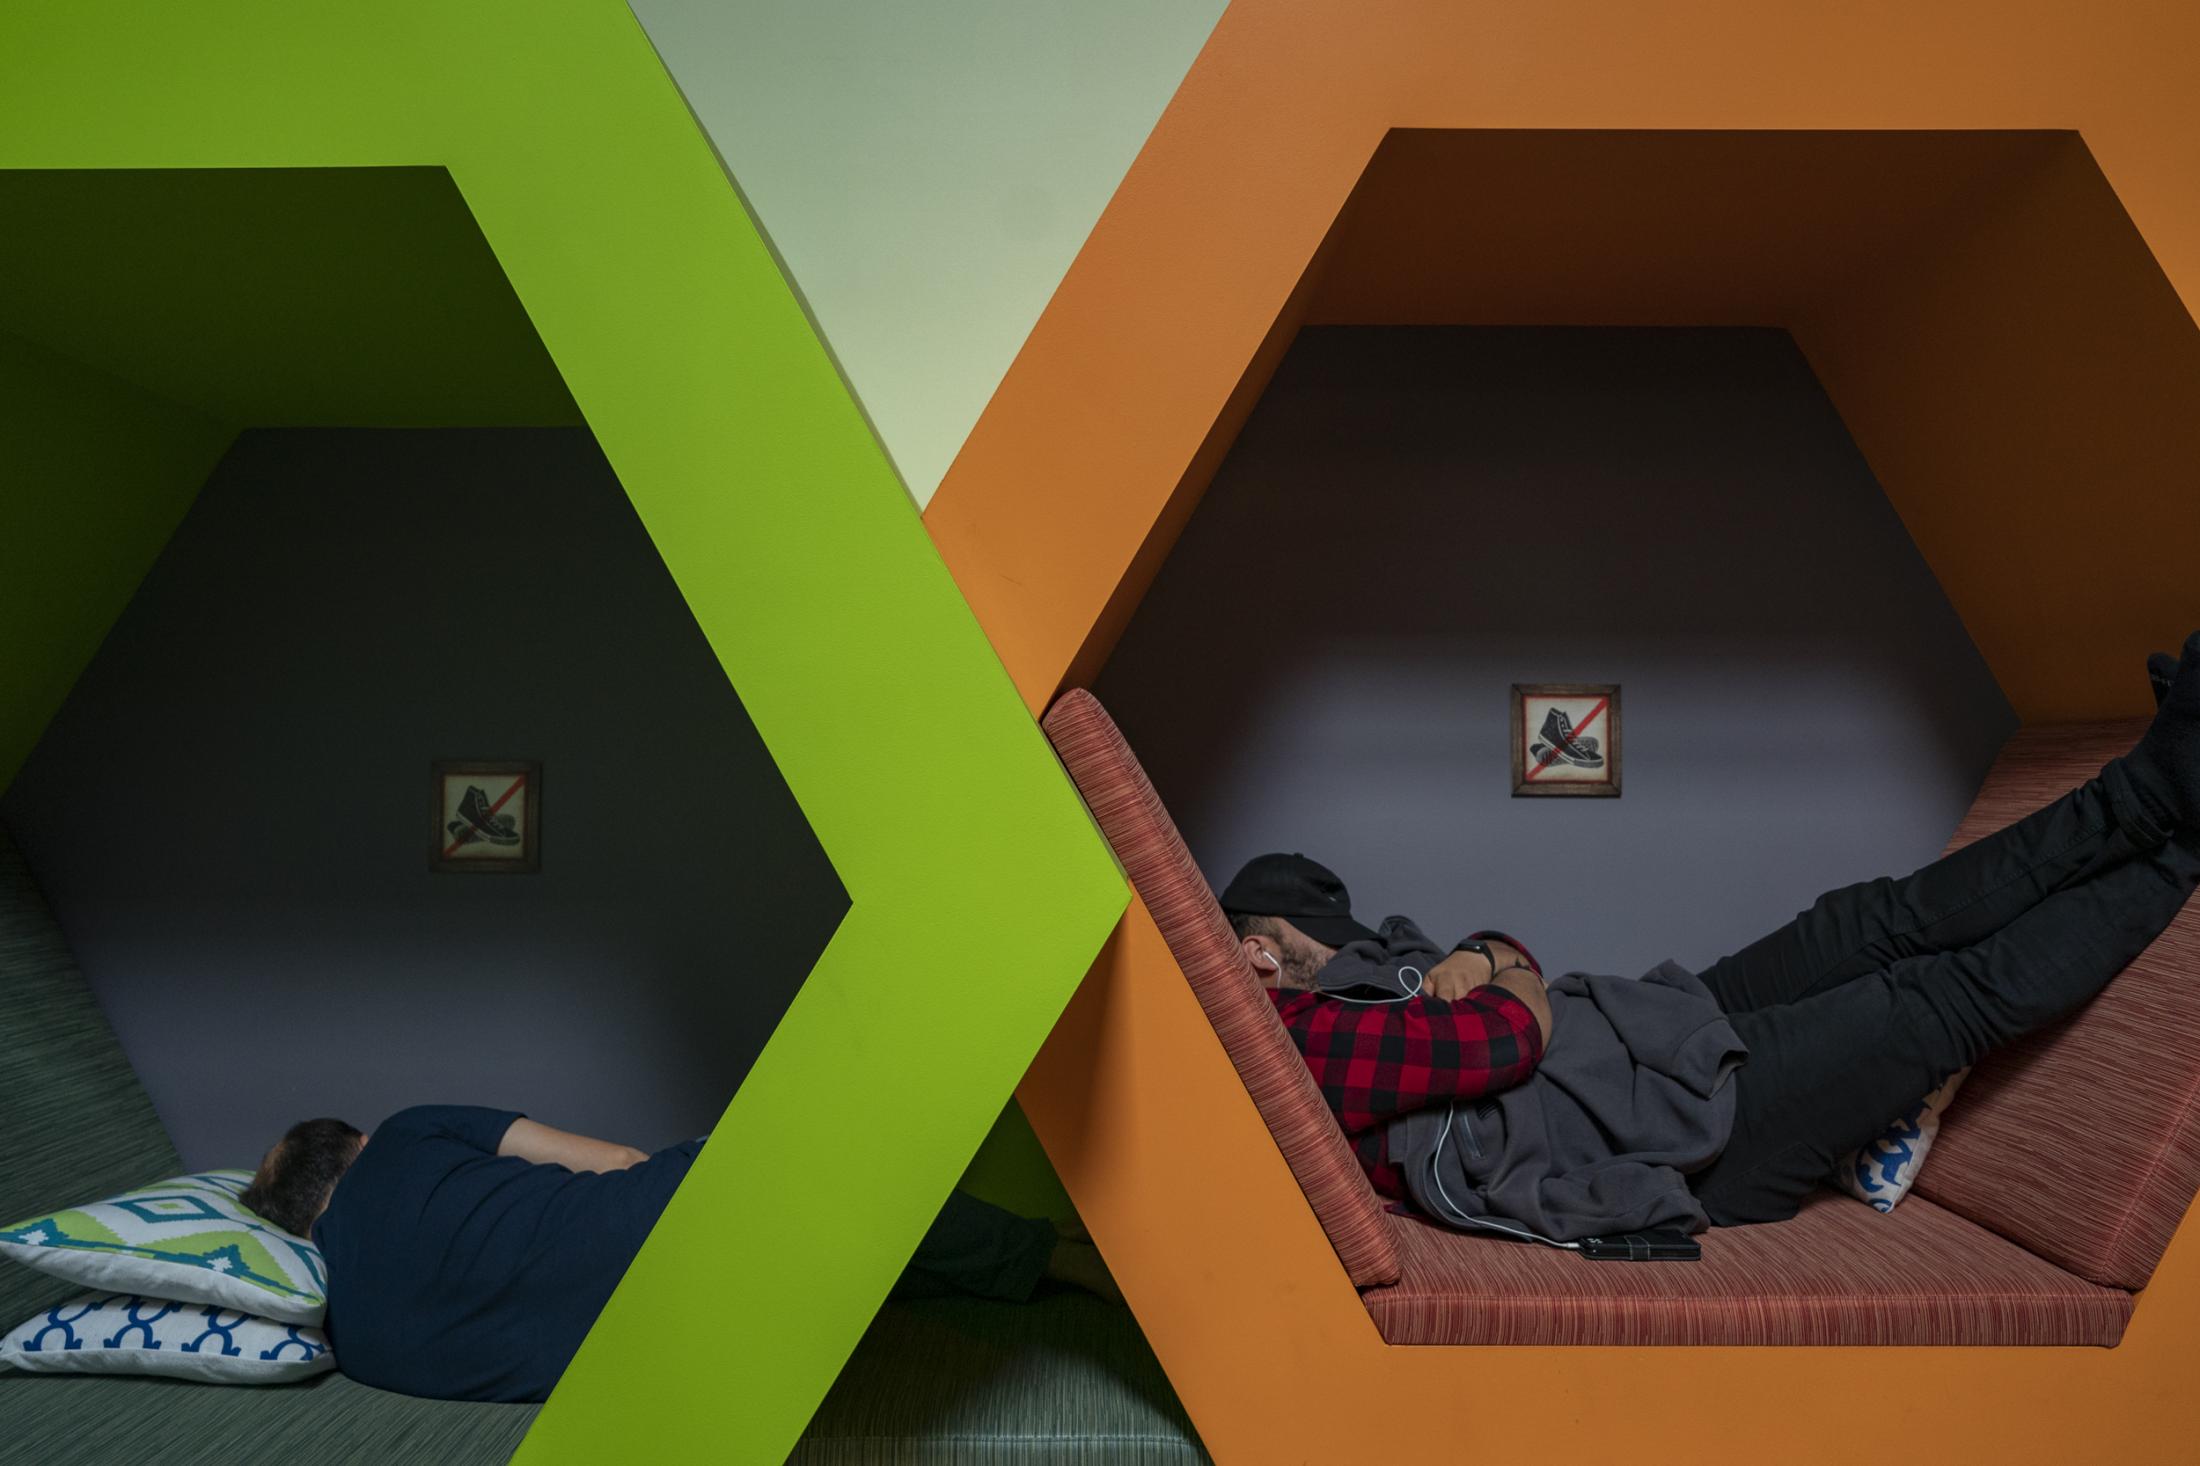 Singles - Employees rest inside "napping pods" at...